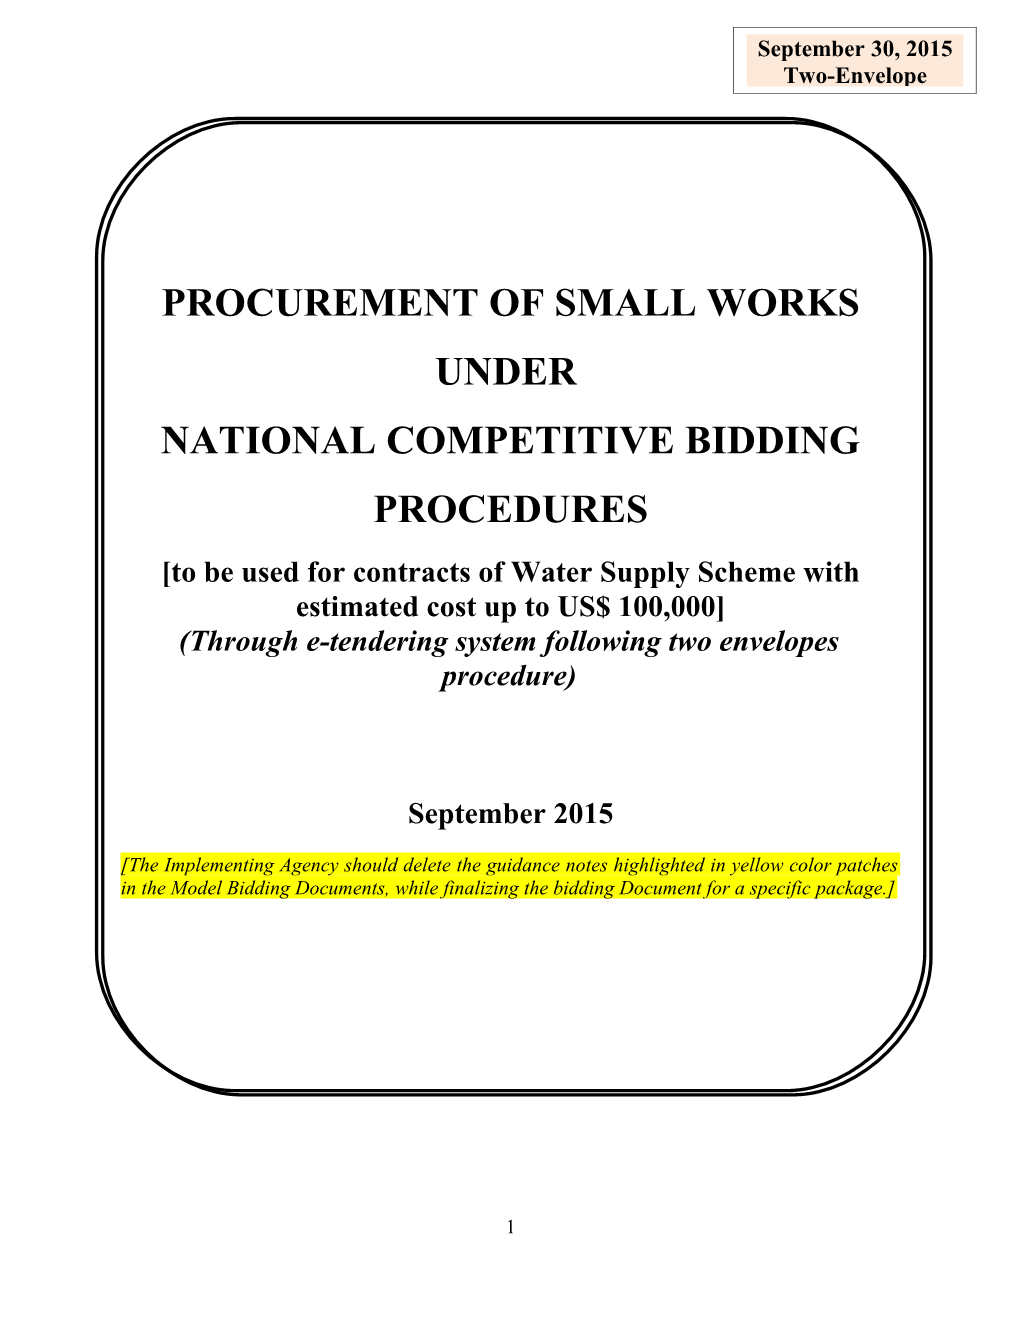 Procurement of Small Works Under